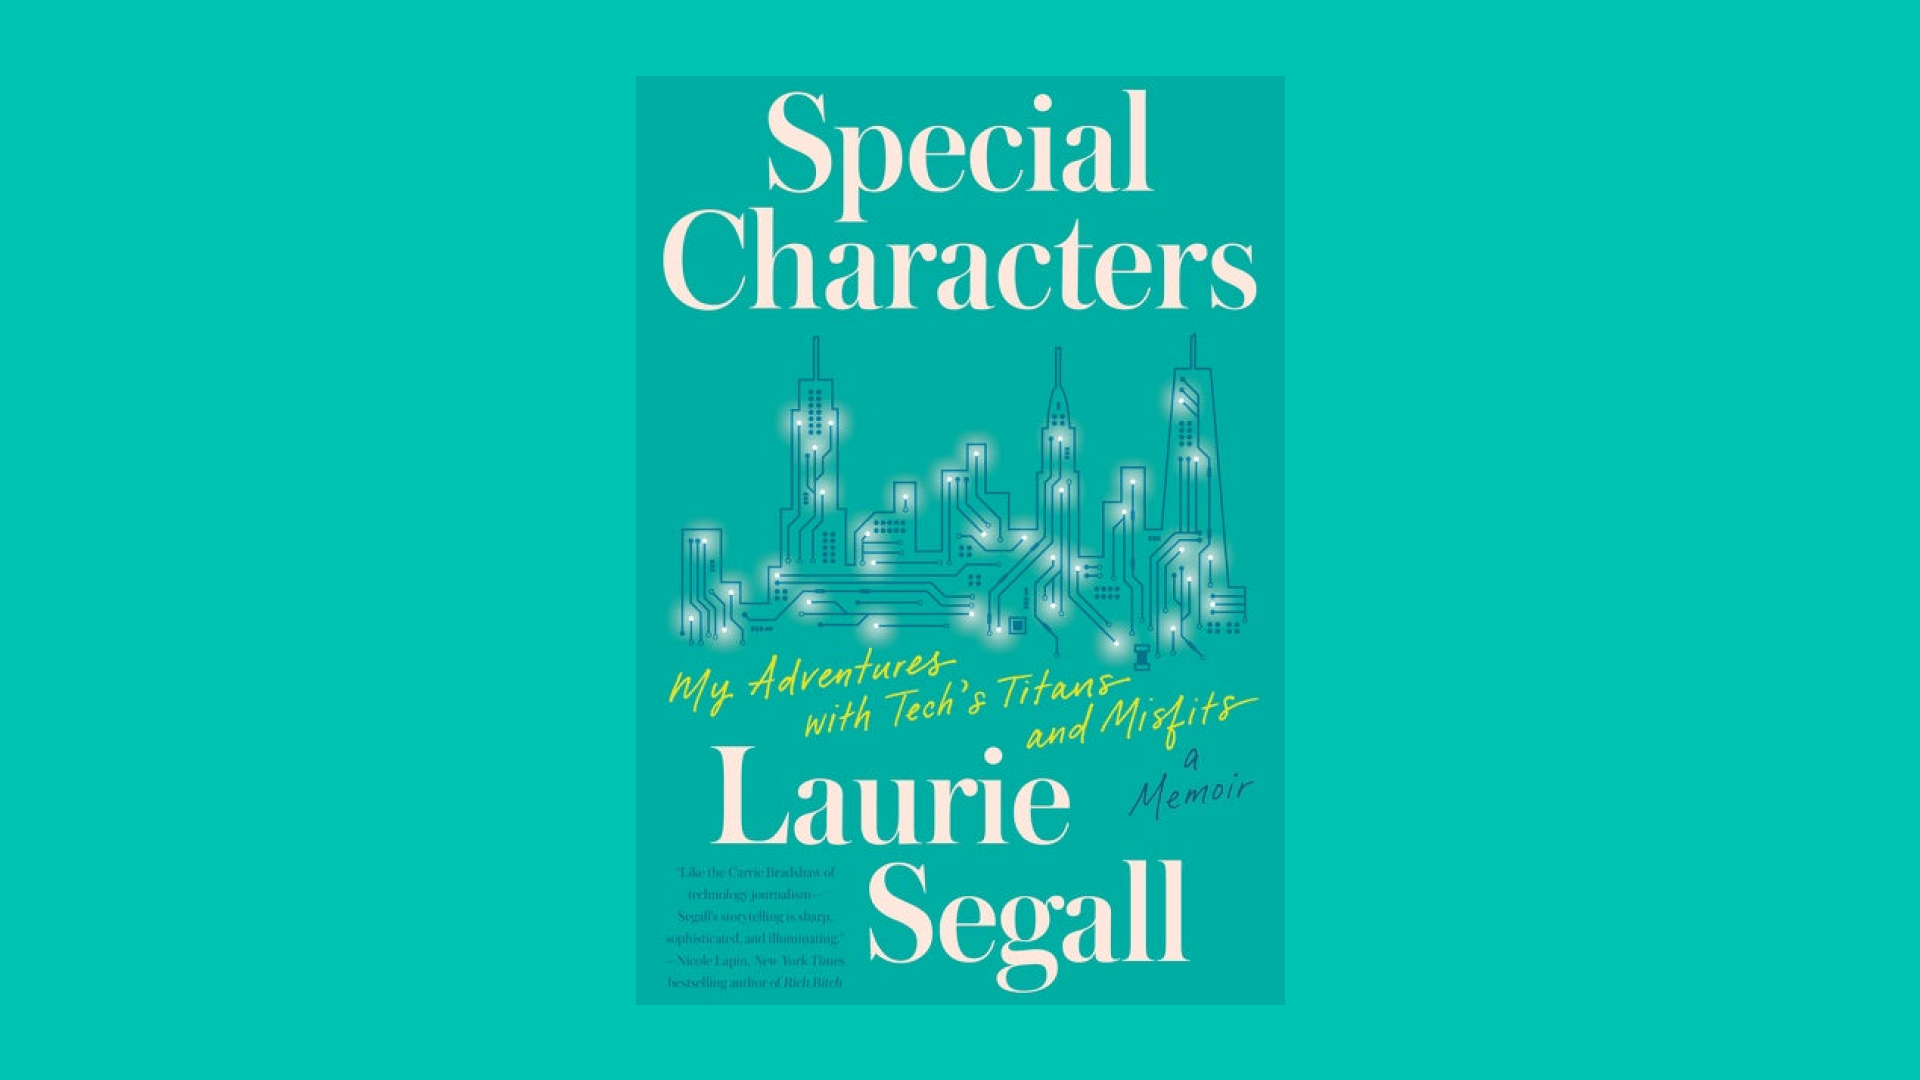 “Special Characters” by Laurie Segall